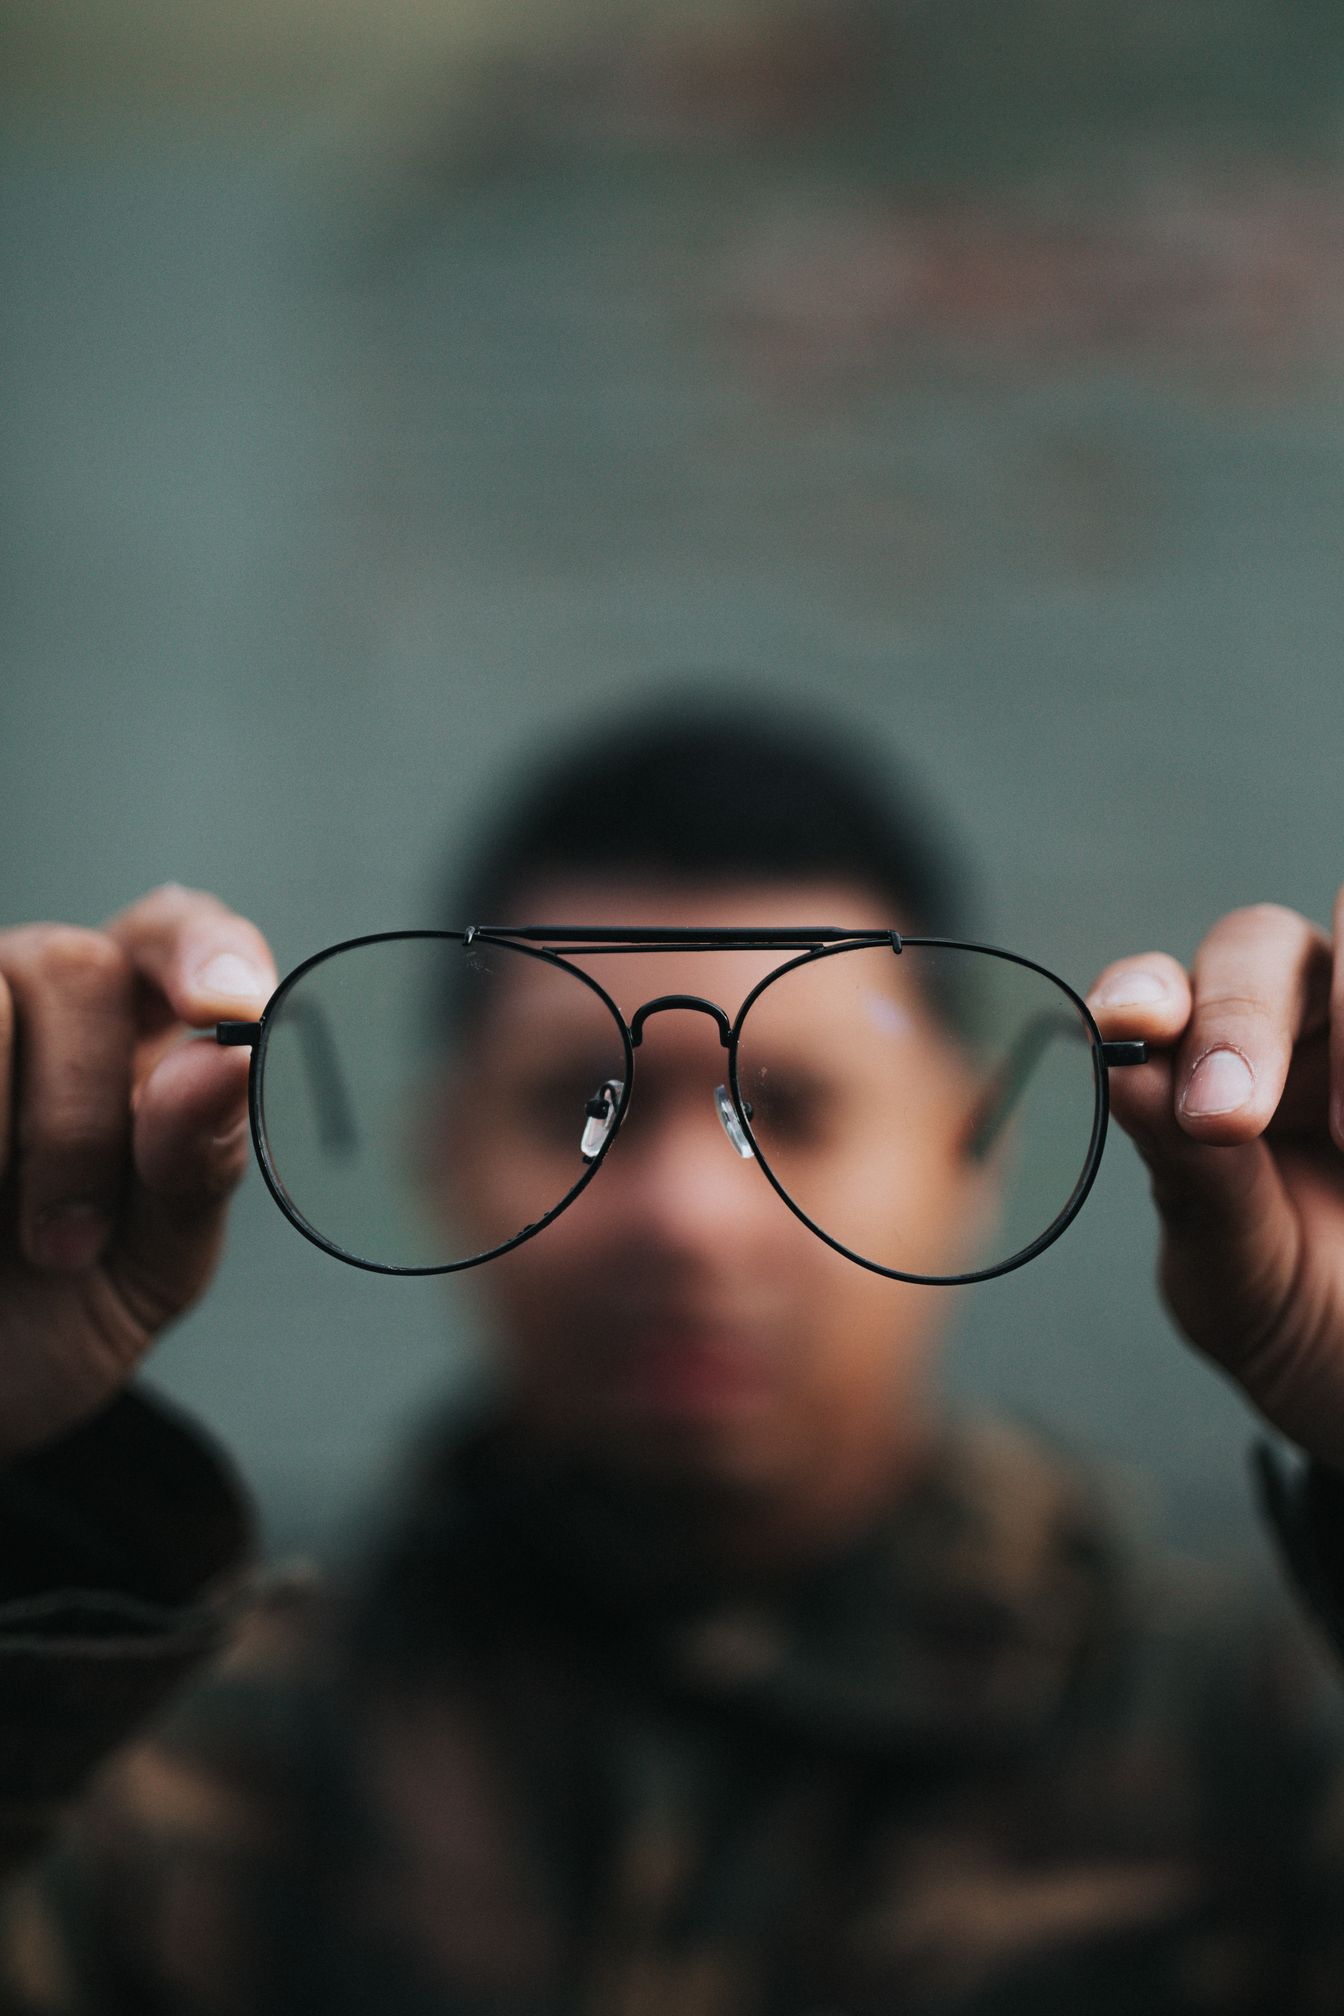 Image of a man holding glasses out from his face, but you can still see through them to his face, by Nathan Dumlao courtesy of Unsplash